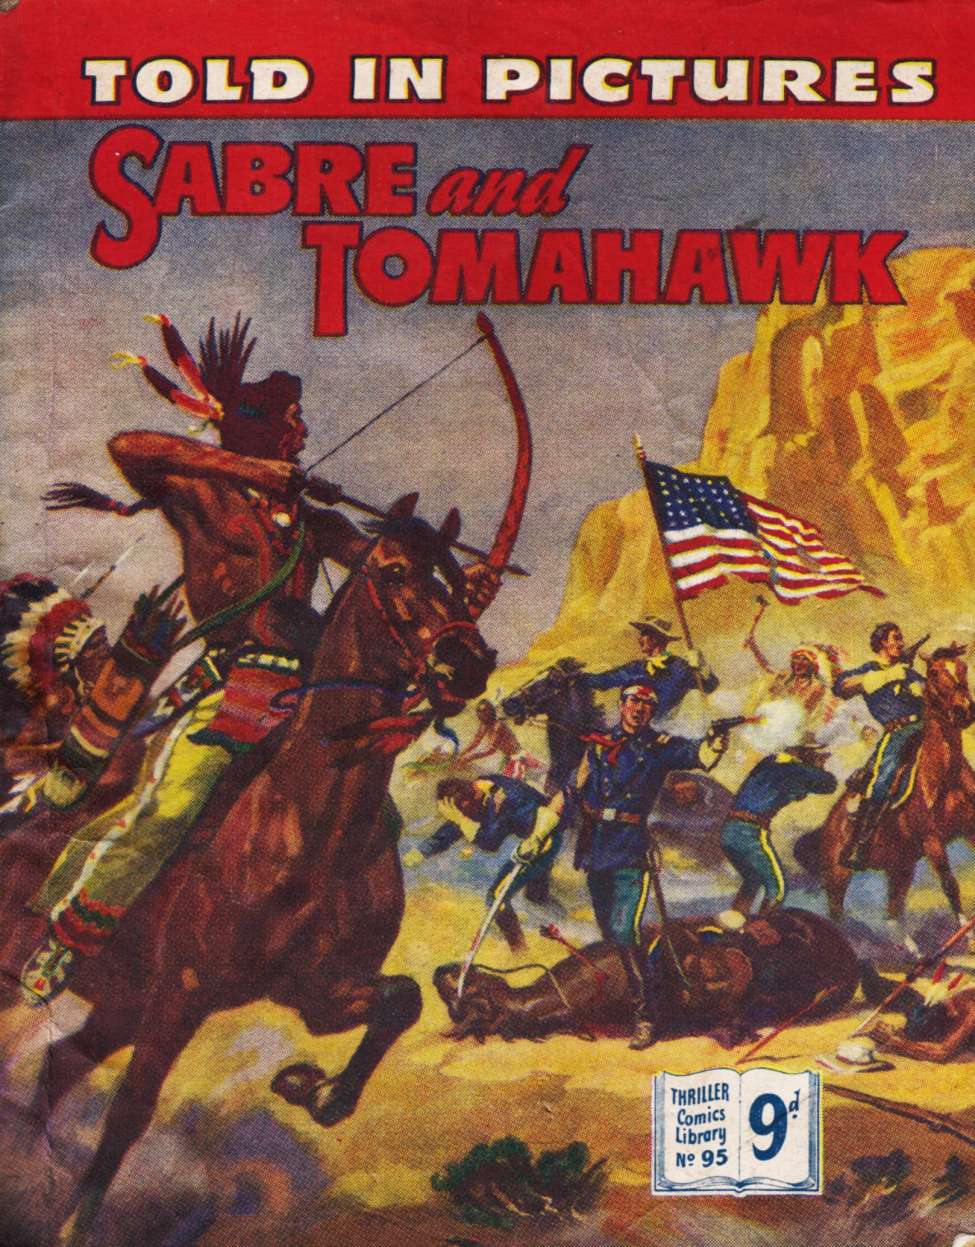 Book Cover For Thriller Comics Library 95 - Sabre and Tomahawk